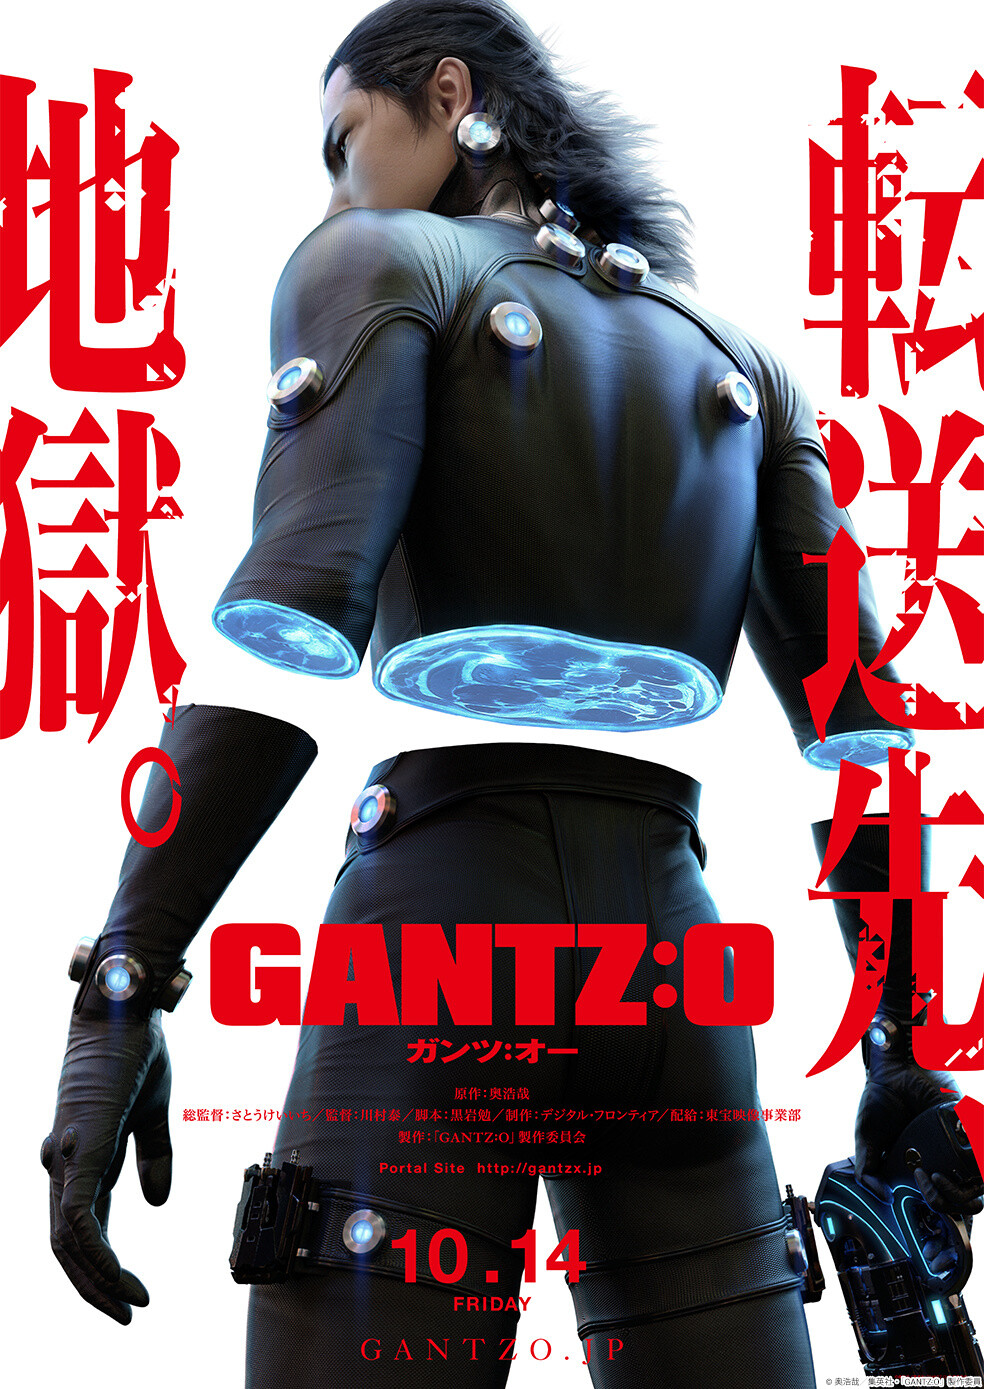 Sneak Preview For Gantzo Revealed And Main Cast Announced Tokyo